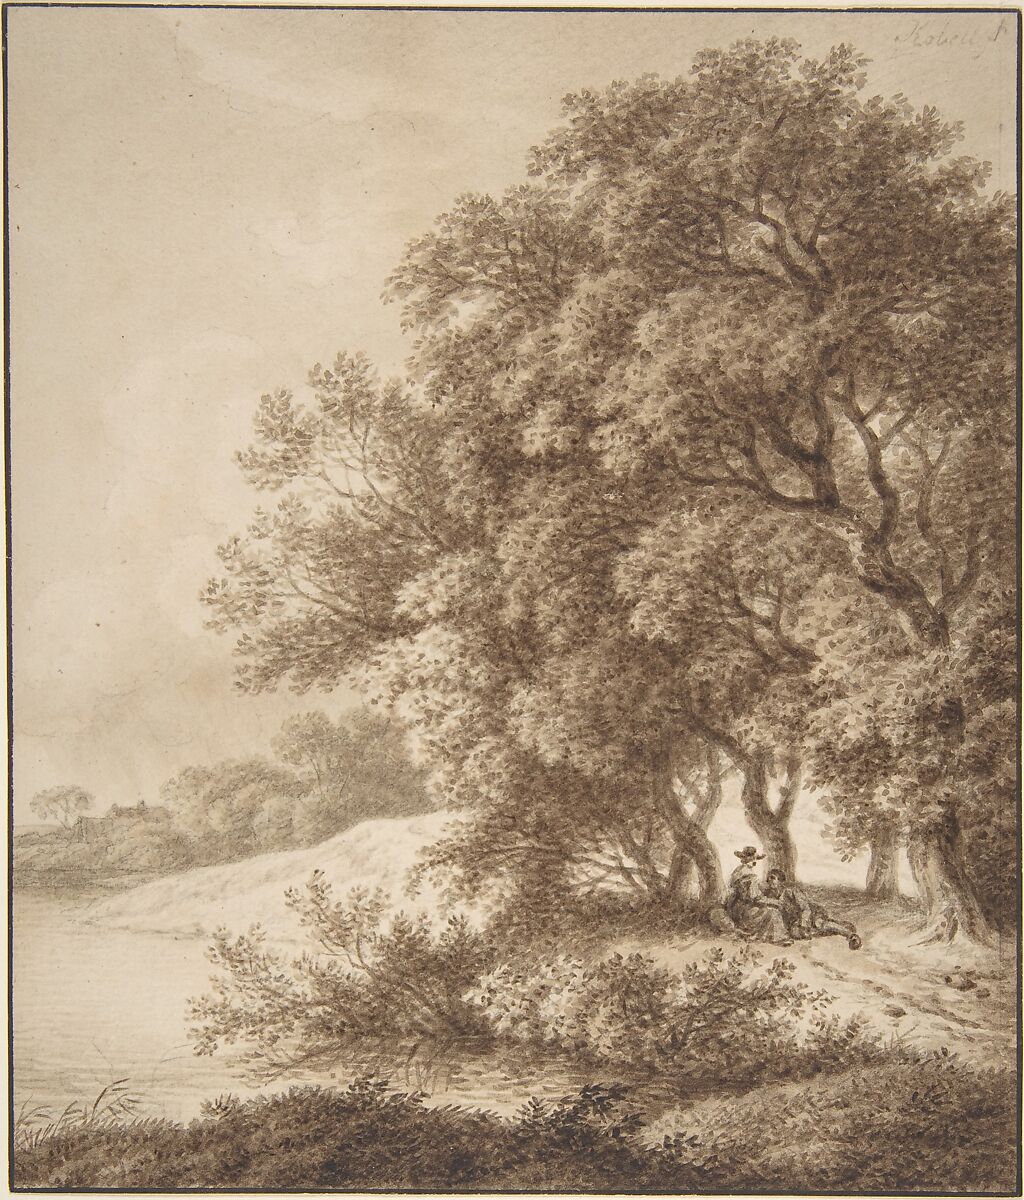 Landscape with Lovers, Ferdinand Kobell (German, Mannheim 1740–1799 Munich), Brush and brown ink, over graphite or black chalk. Framing line in pen and black ink 